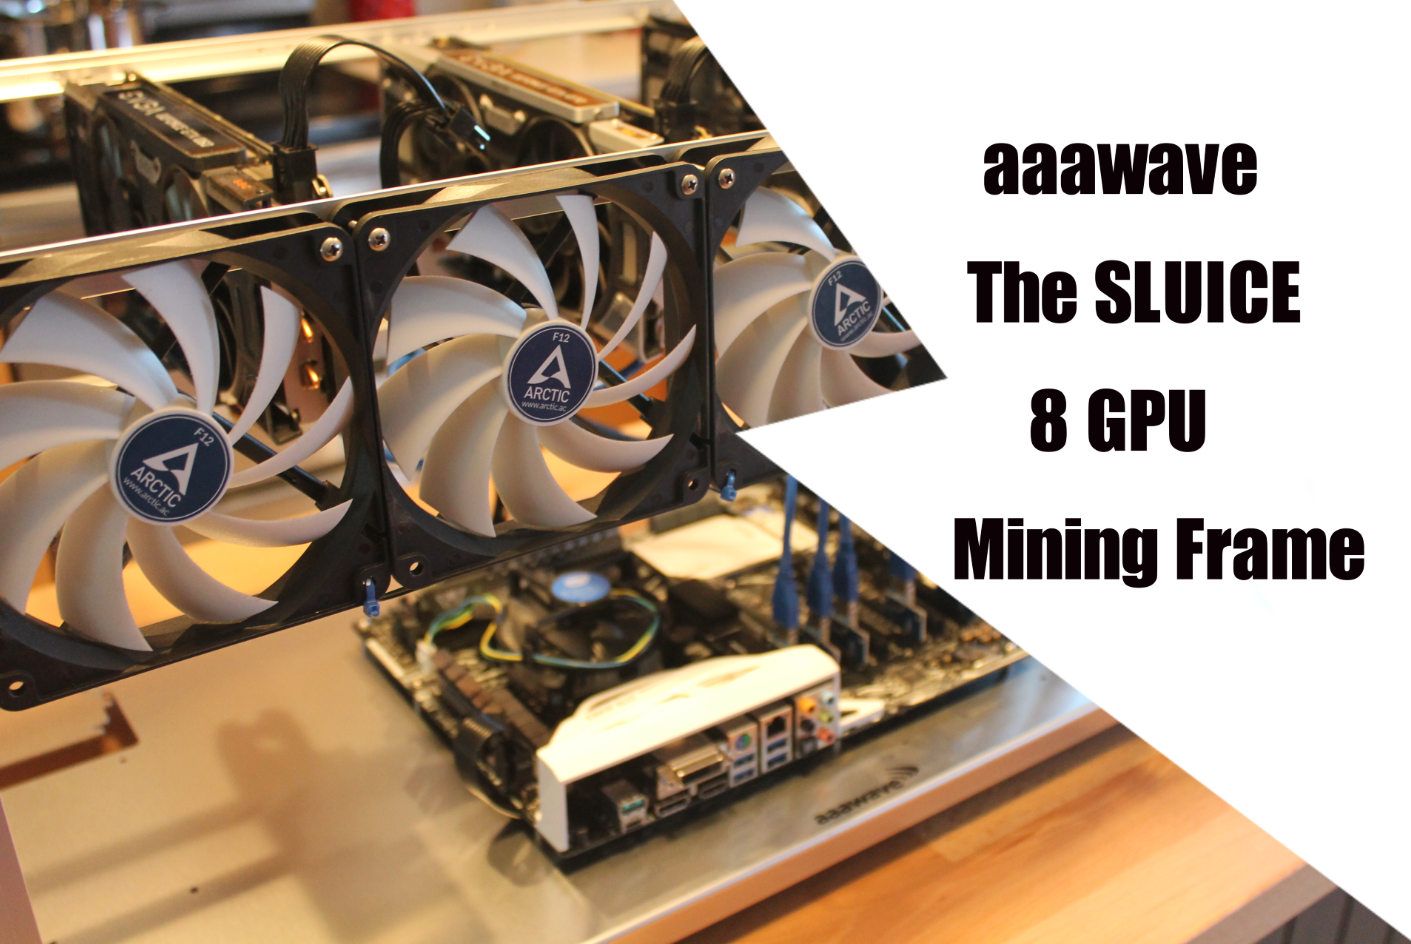 The new aaawave “The Sluice” 8GPU mining frame assembly and review.